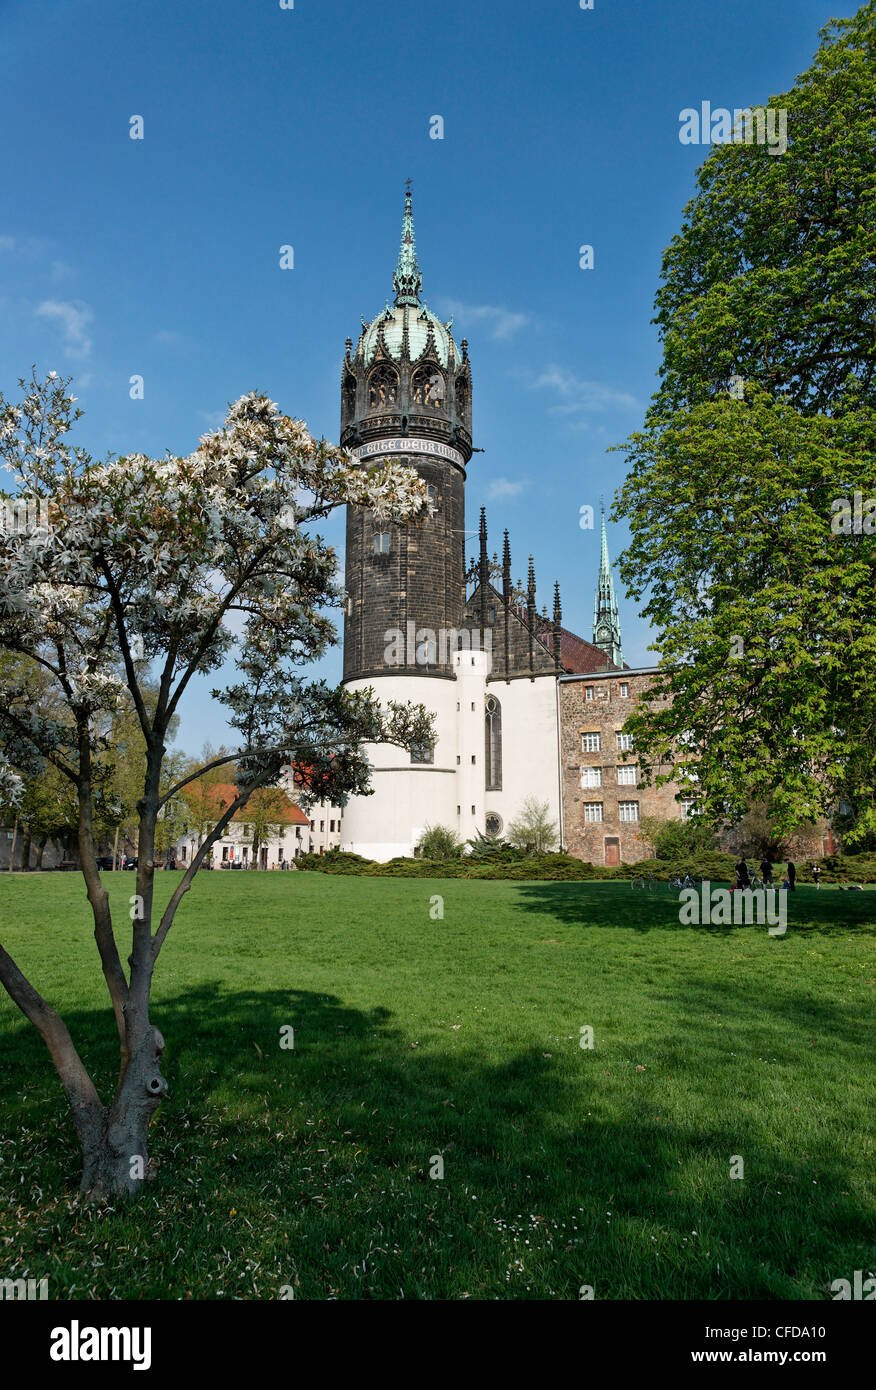 All Saints' Church in Lutherstadt Wittenberg, Saxony-Anhalt, Germany Stock Photo